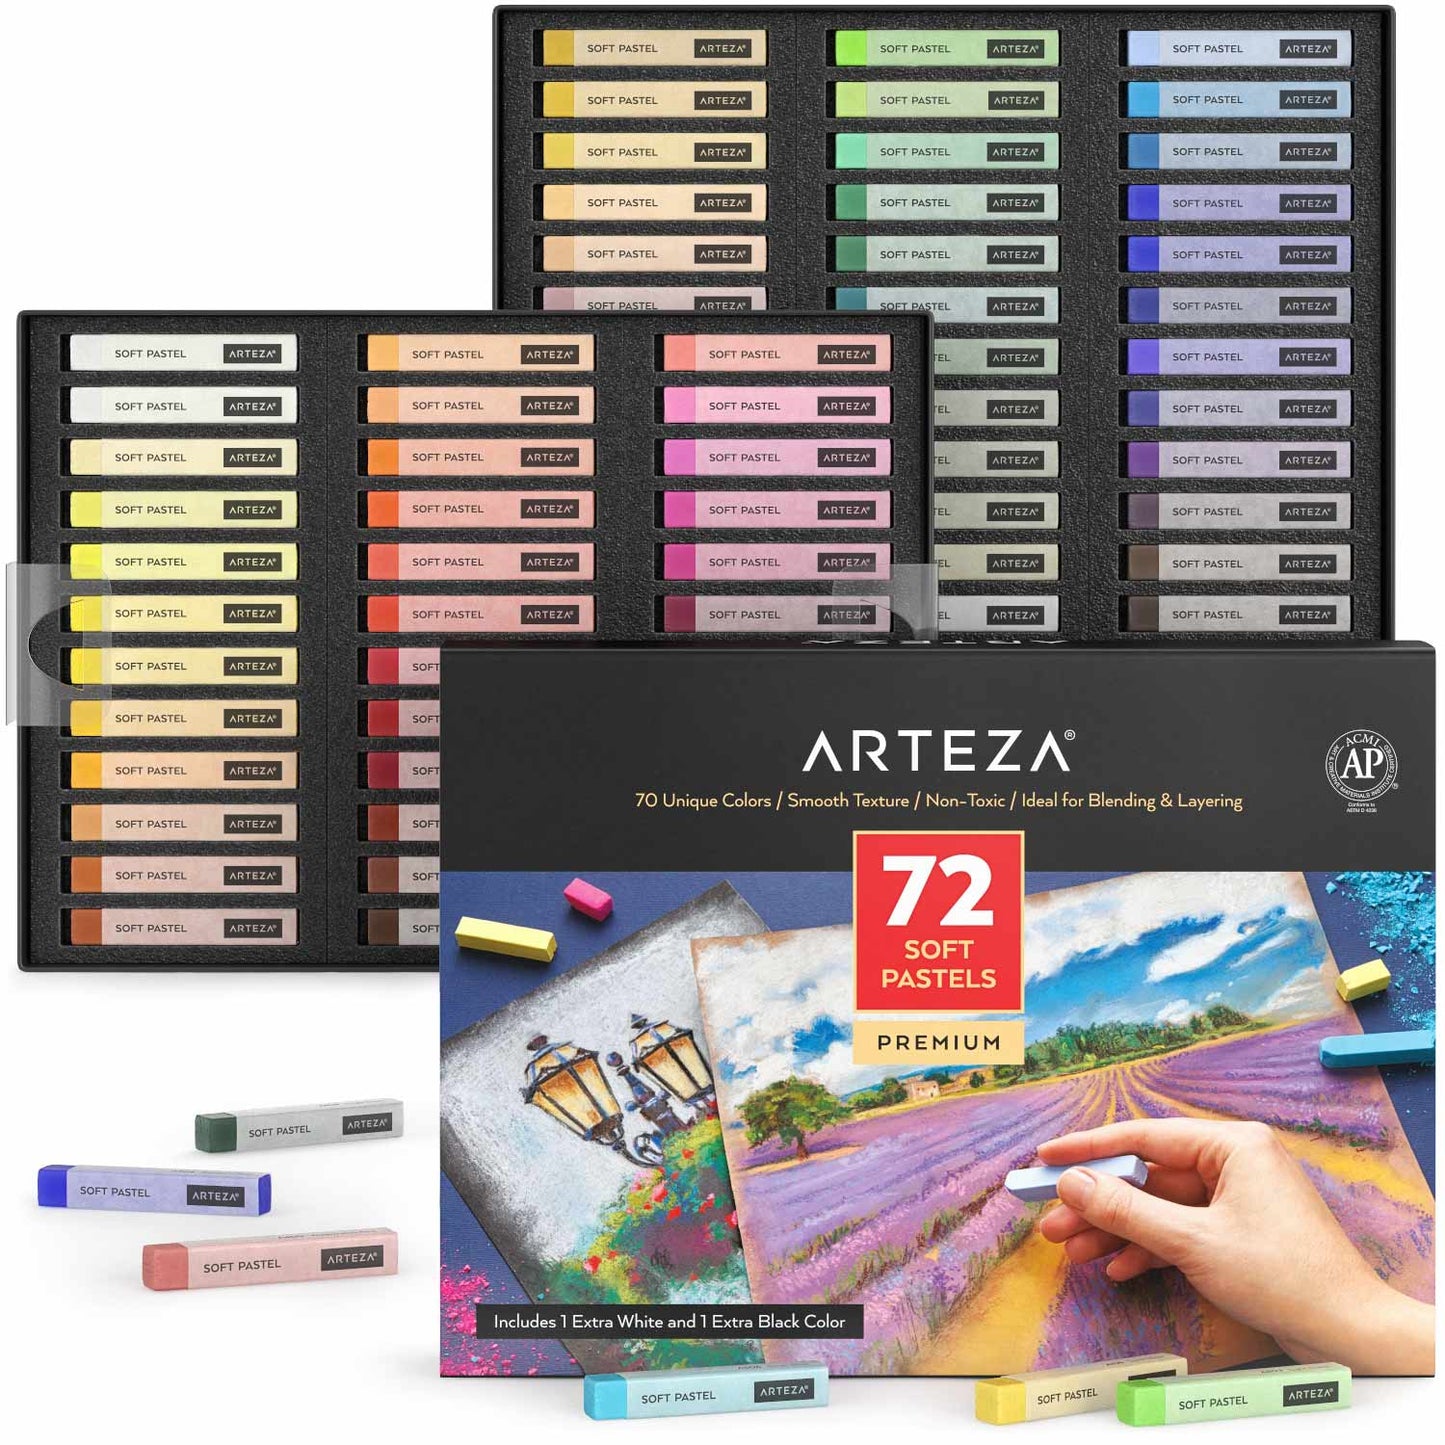  MONT MARTE Soft Pastels Signature 72pc, Set of 72 Assorted  Colored Pastel Sticks, Vibrant and Blendable, Ideal for Art, Craft,  Drawing, Sketching : Arts, Crafts & Sewing